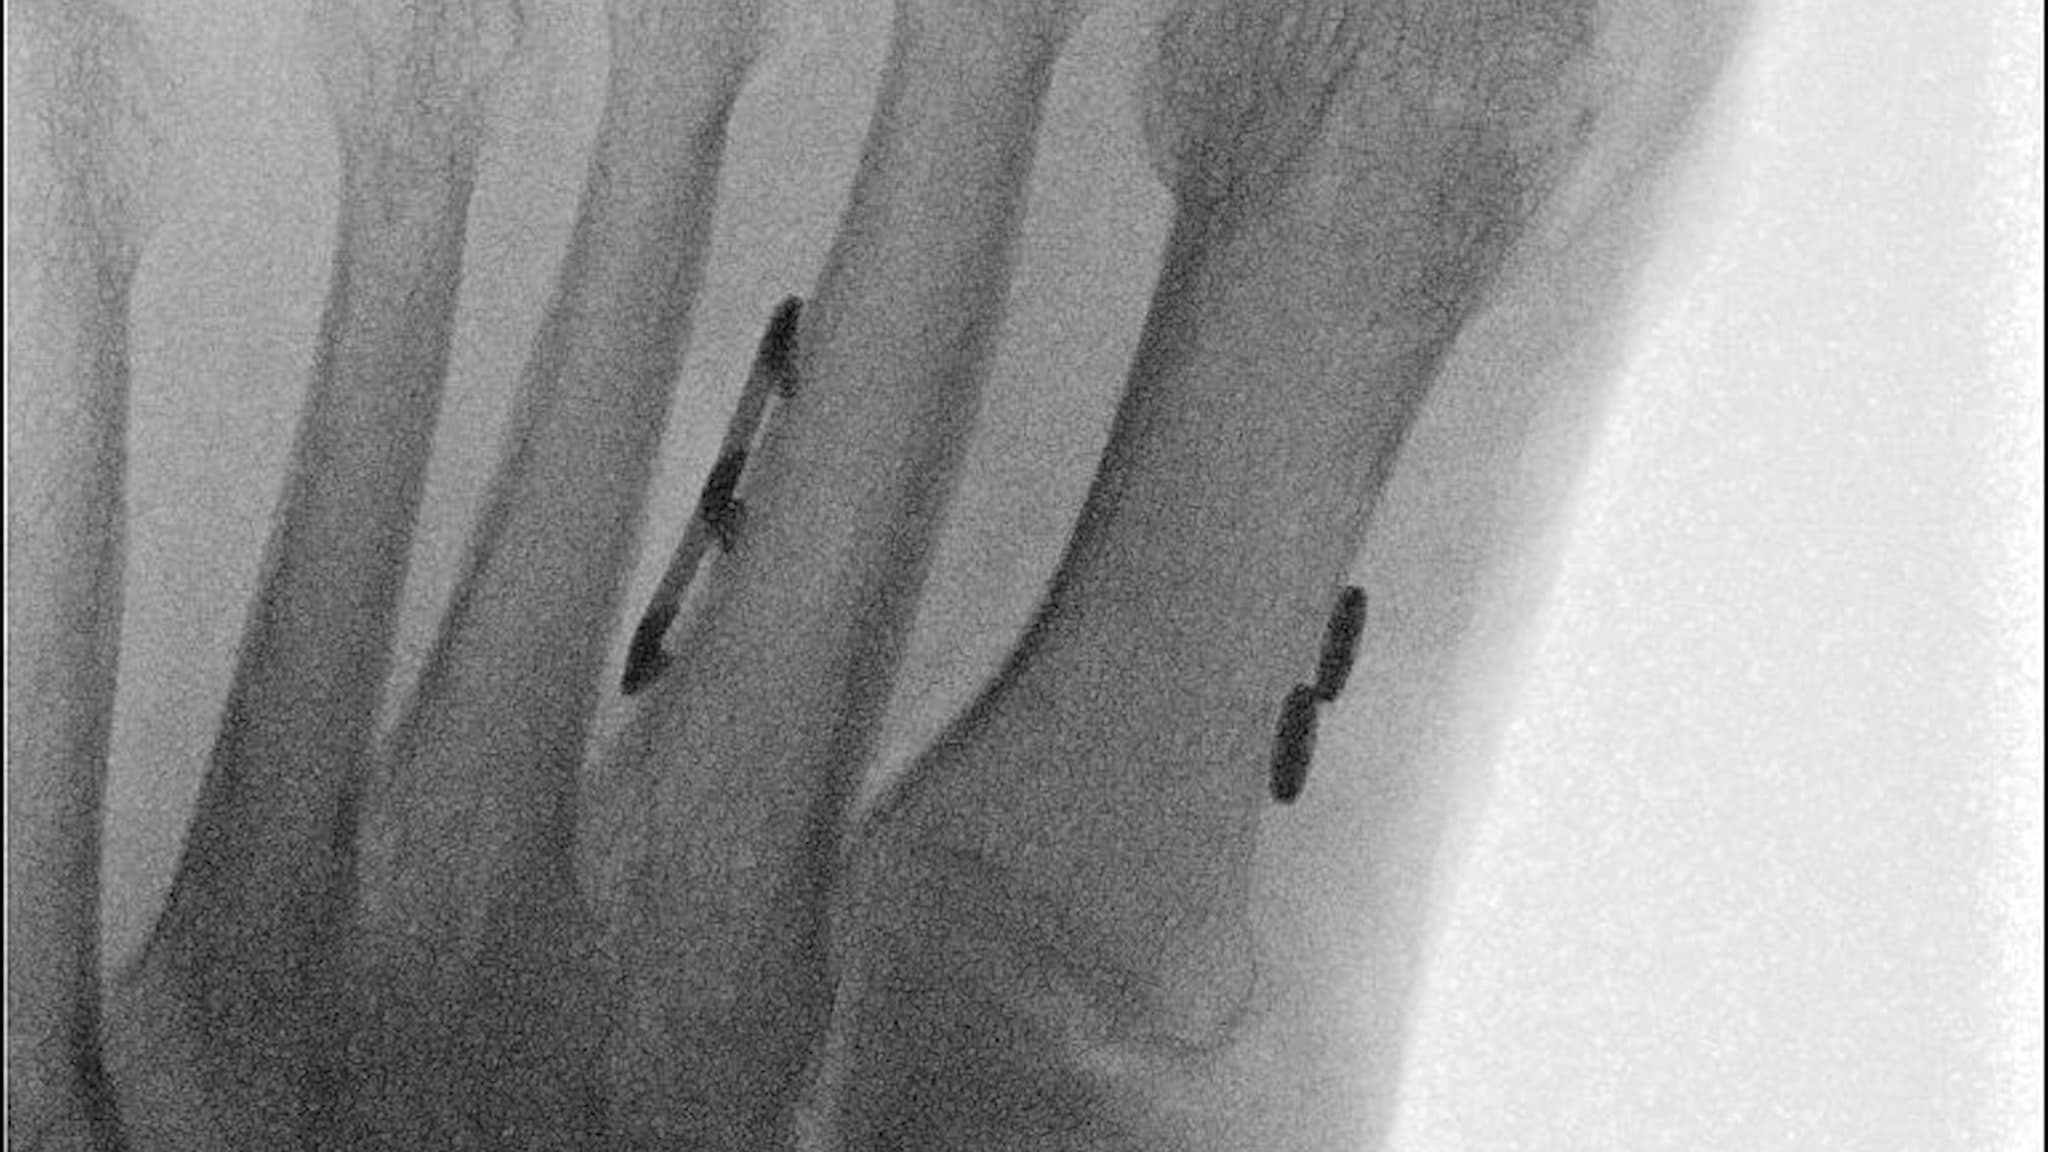 Adjunct Fixation With the Knotless Mini TightRope® System for Hallux Valgus Correction